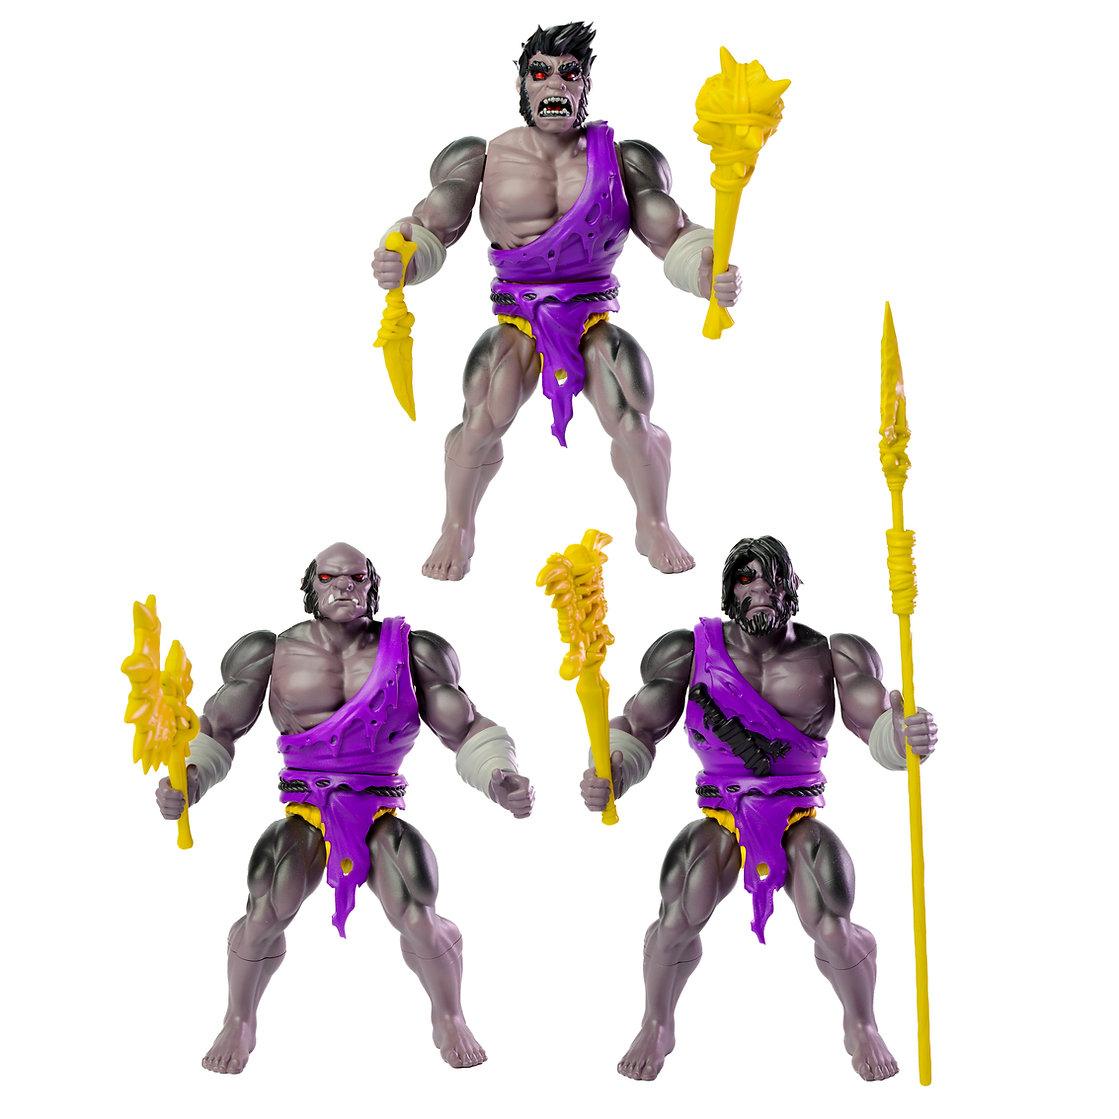 Legends of Dragonore Brukteror Cave Men Tribe Grunts Army 3-Pack 5.5" Figures 9101w 